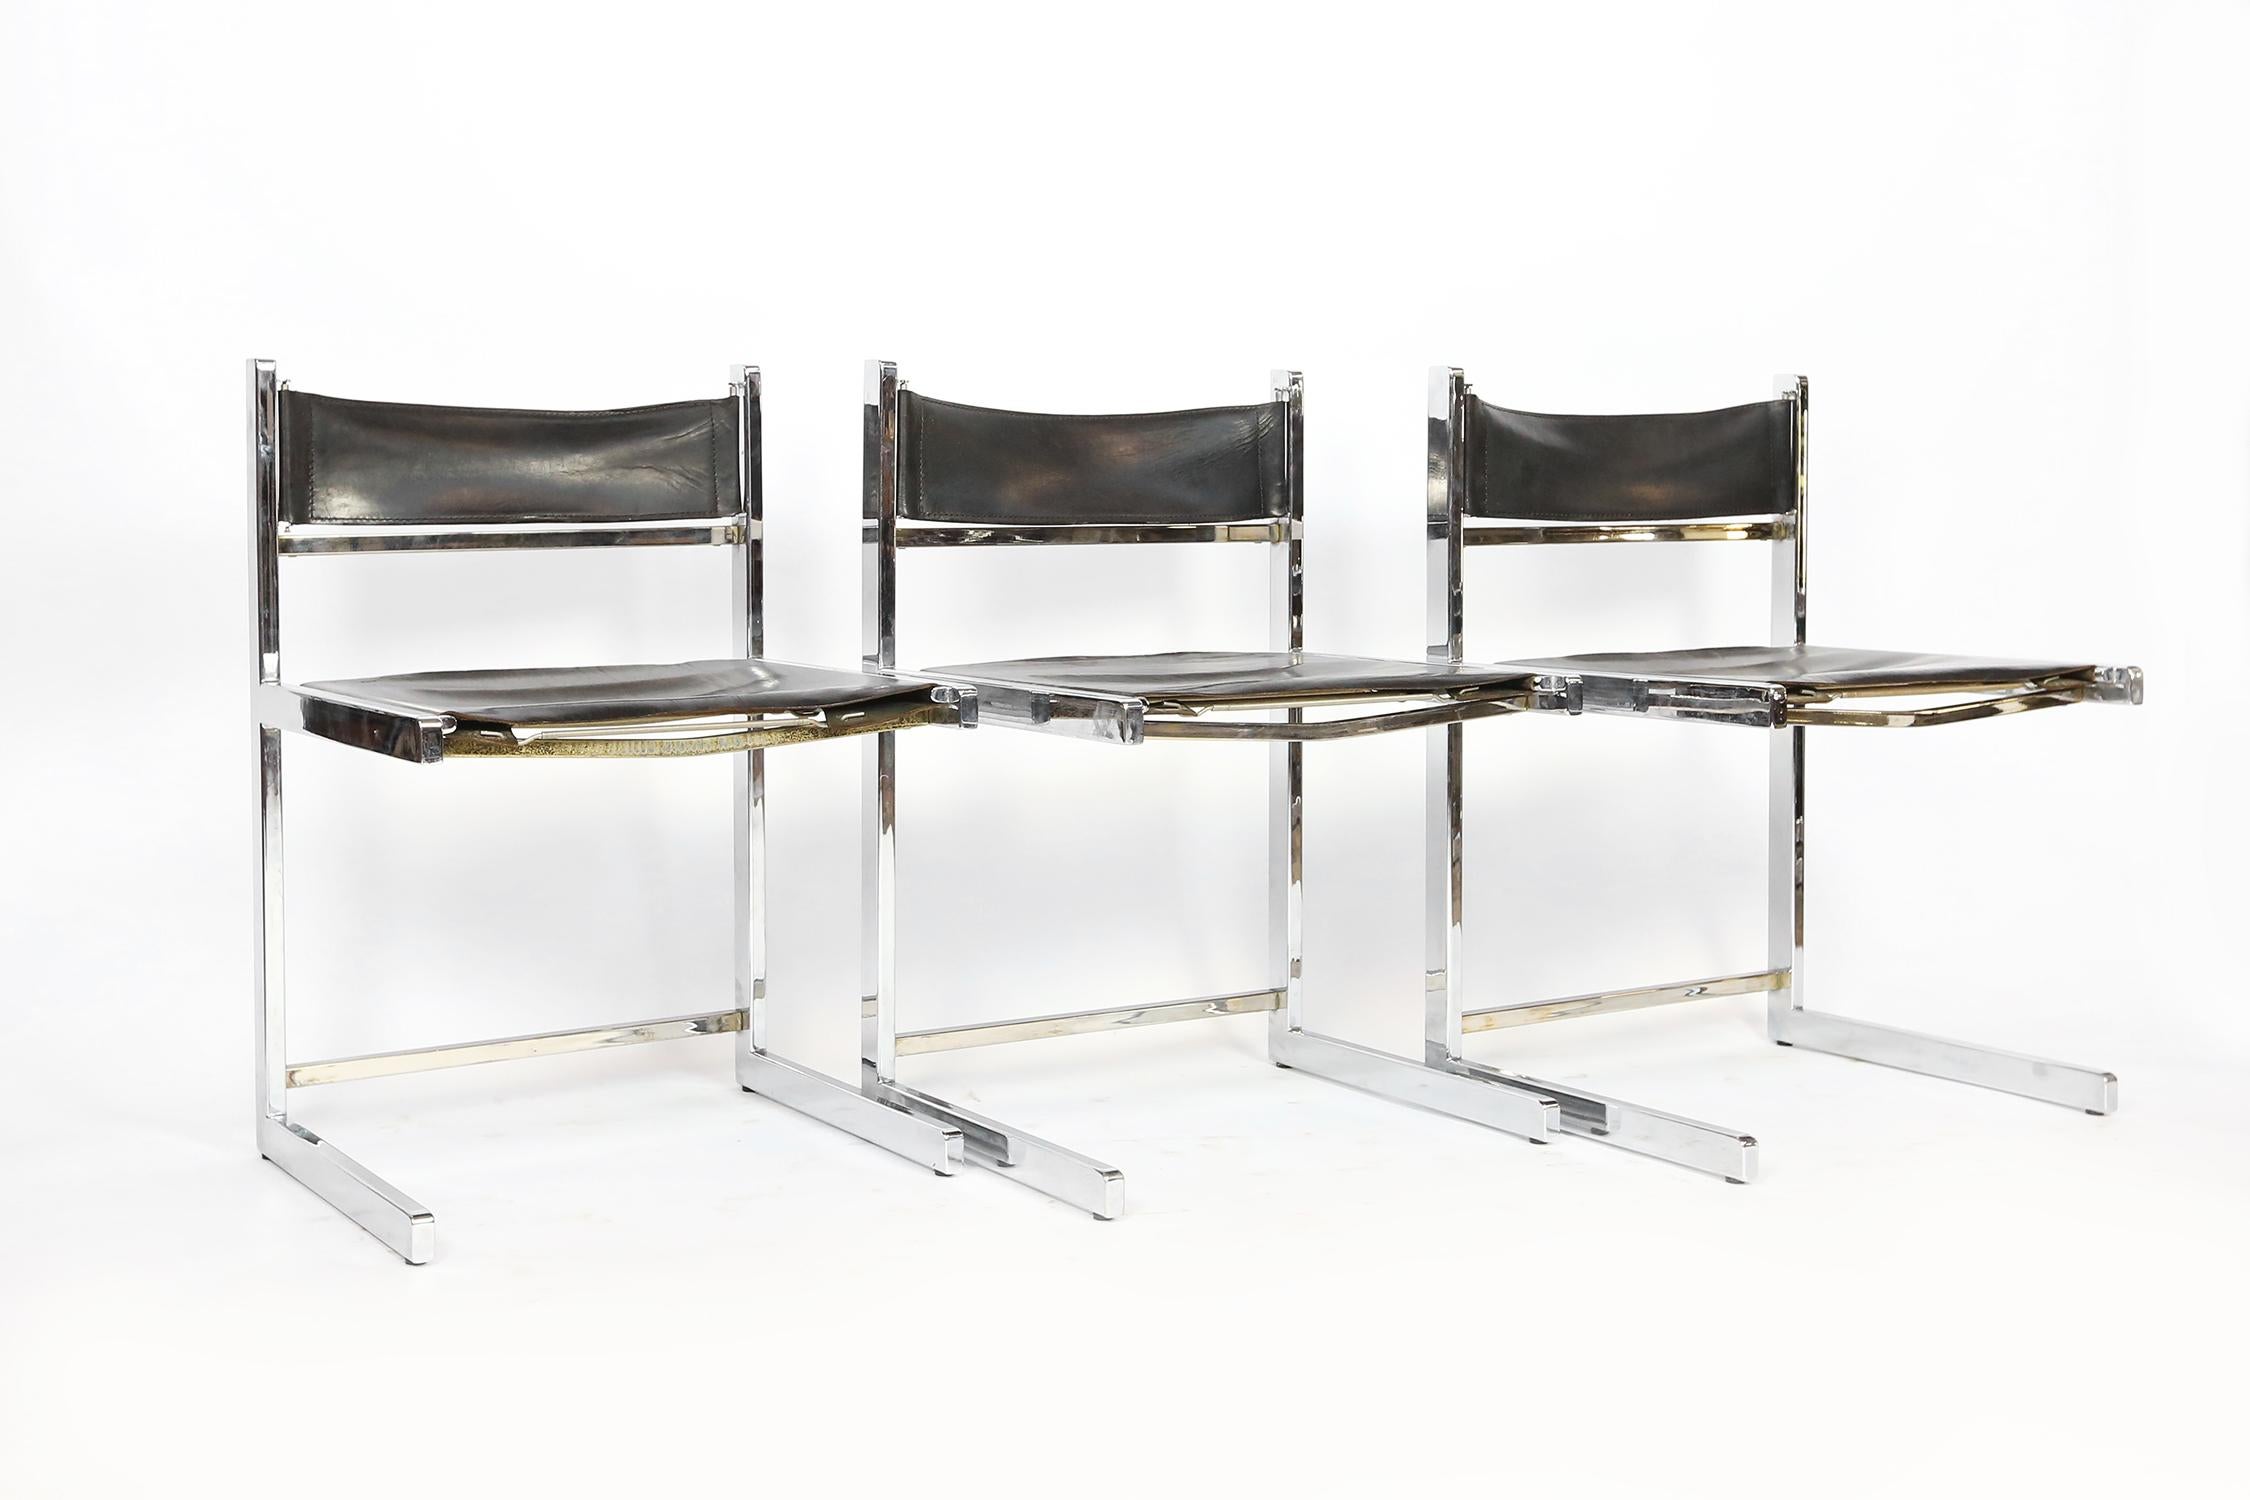 Unique 1970s Italian dining chairs in a cubist shape.
Made of chrome-plated metal and tan leather in great condition.
In total 16 pieces available, priced per piece.
   